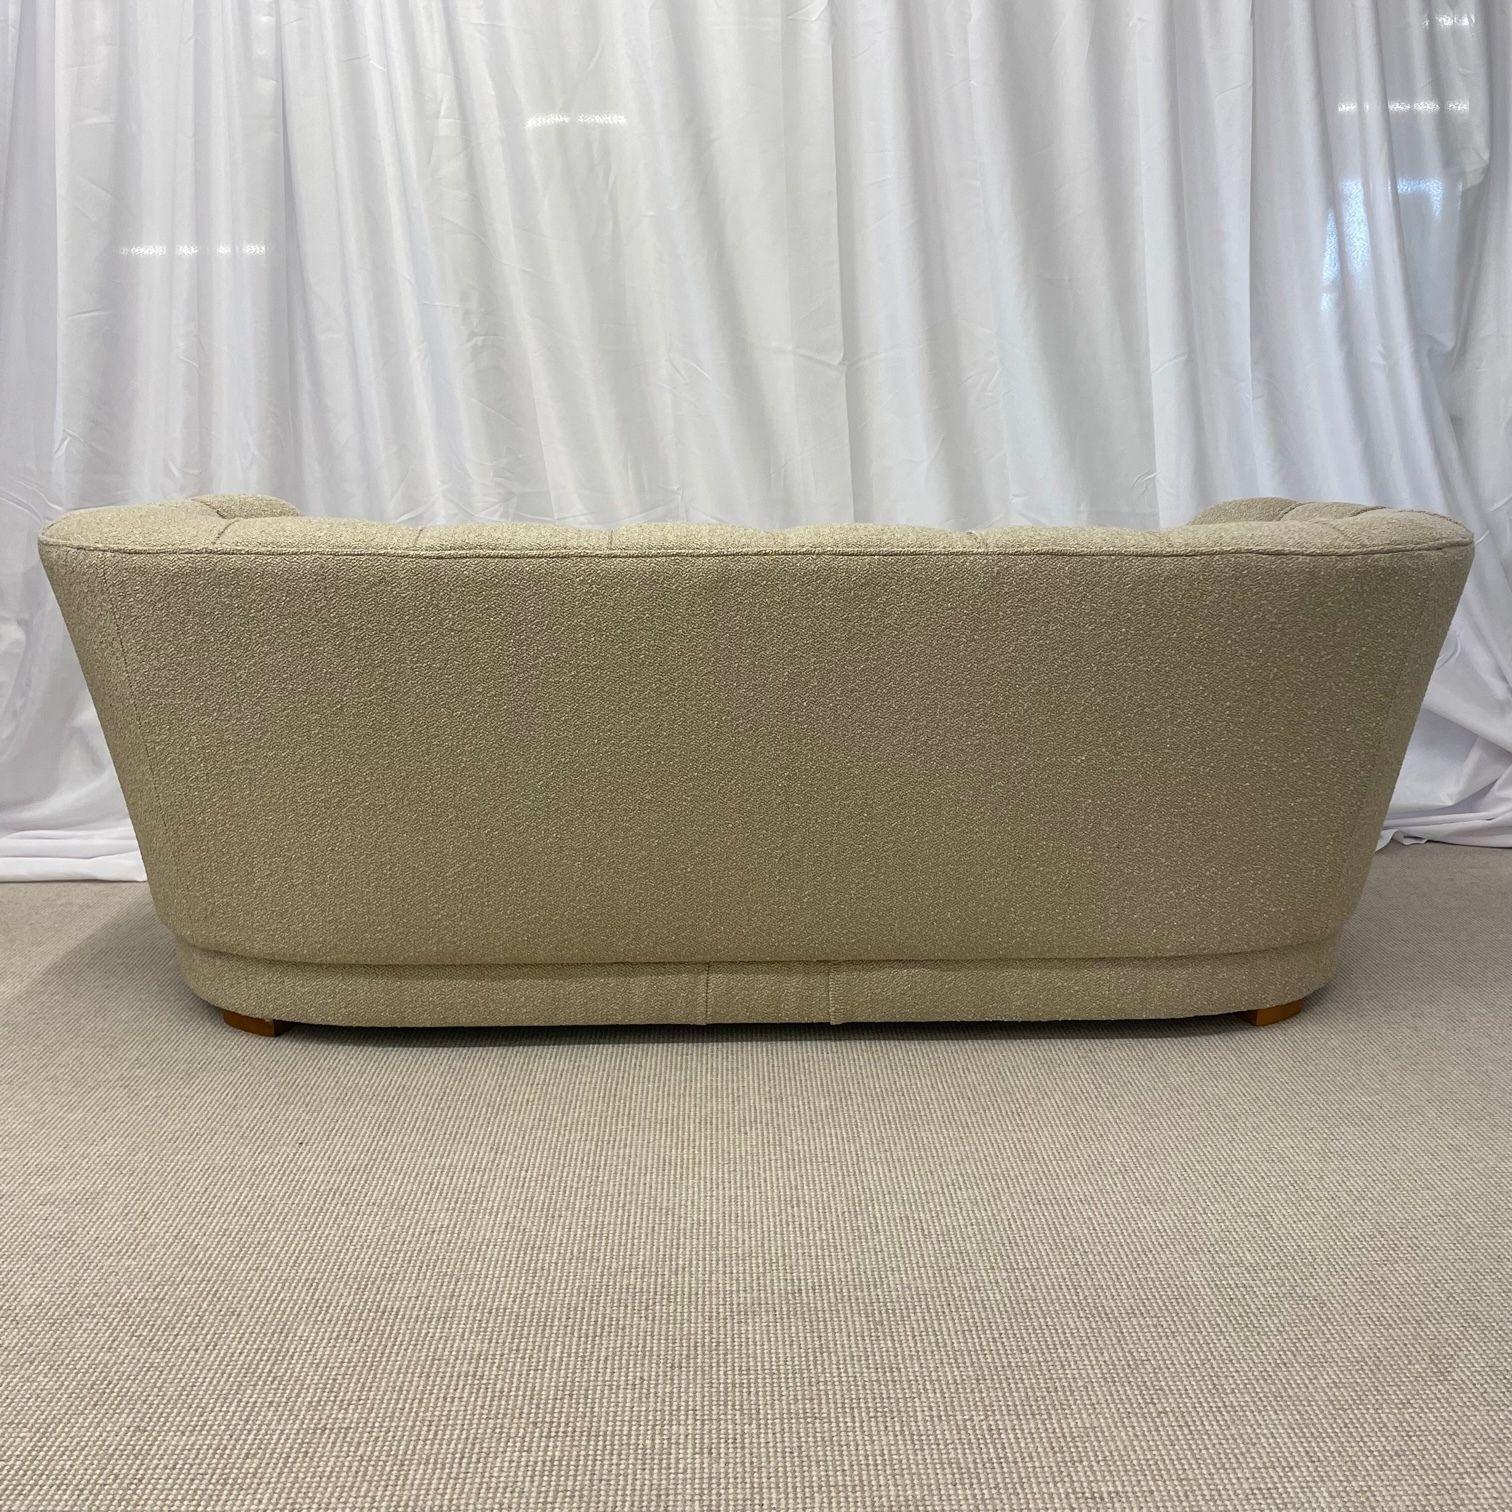 Flemming Lassen Style, Danish Mid-Century Modern, Curved Sofa, Boucle, 1940s For Sale 7